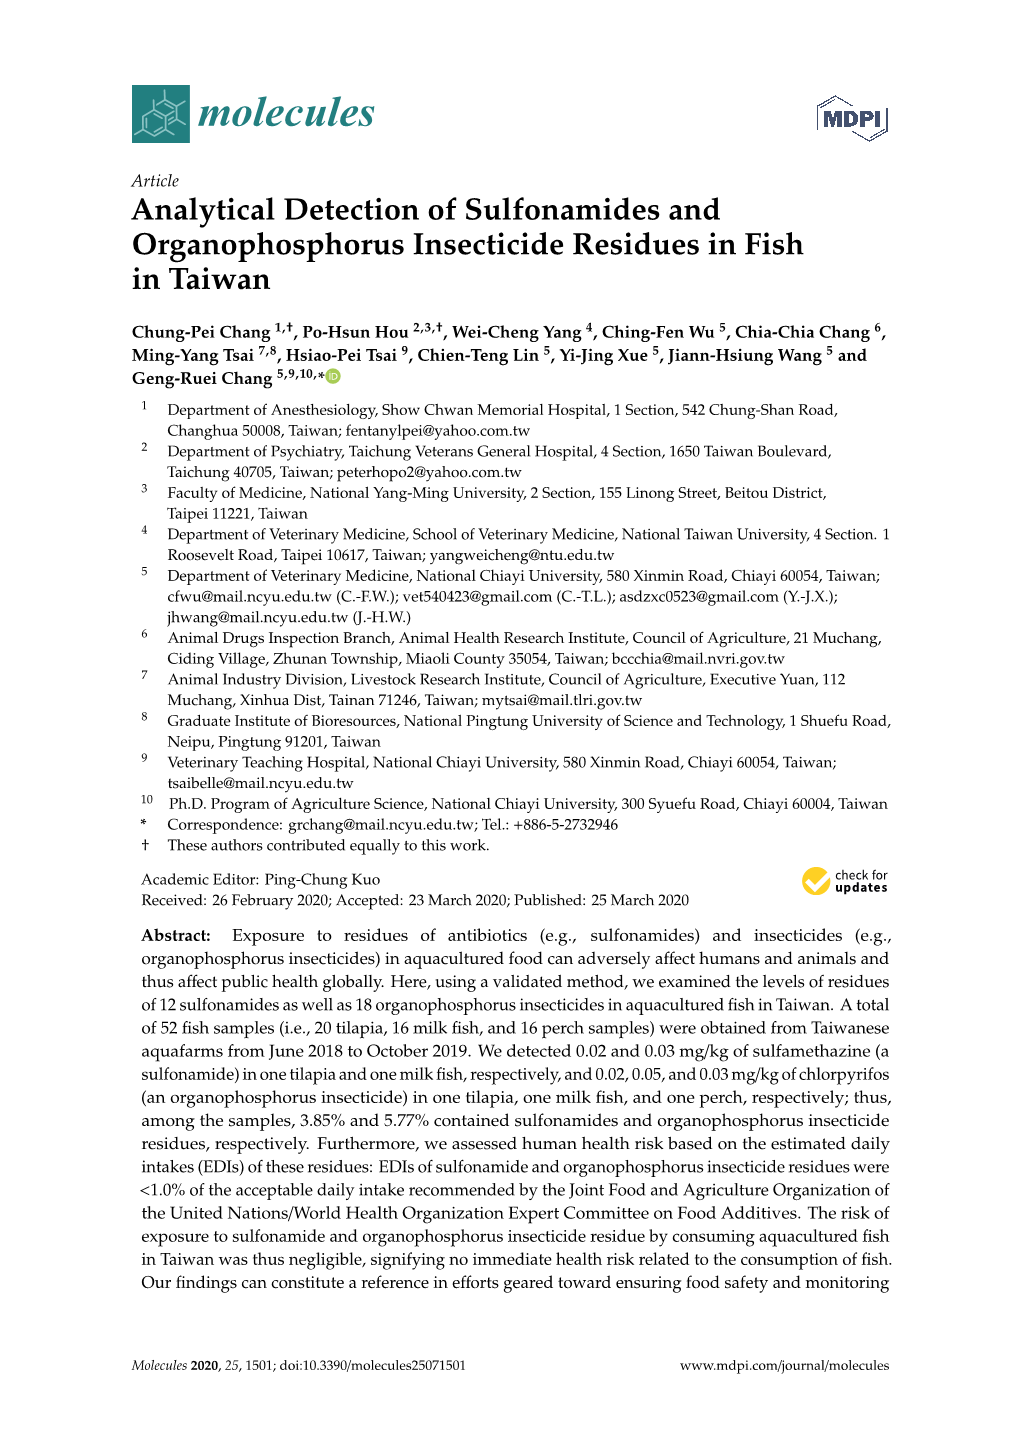 Analytical Detection of Sulfonamides and Organophosphorus Insecticide Residues in Fish in Taiwan